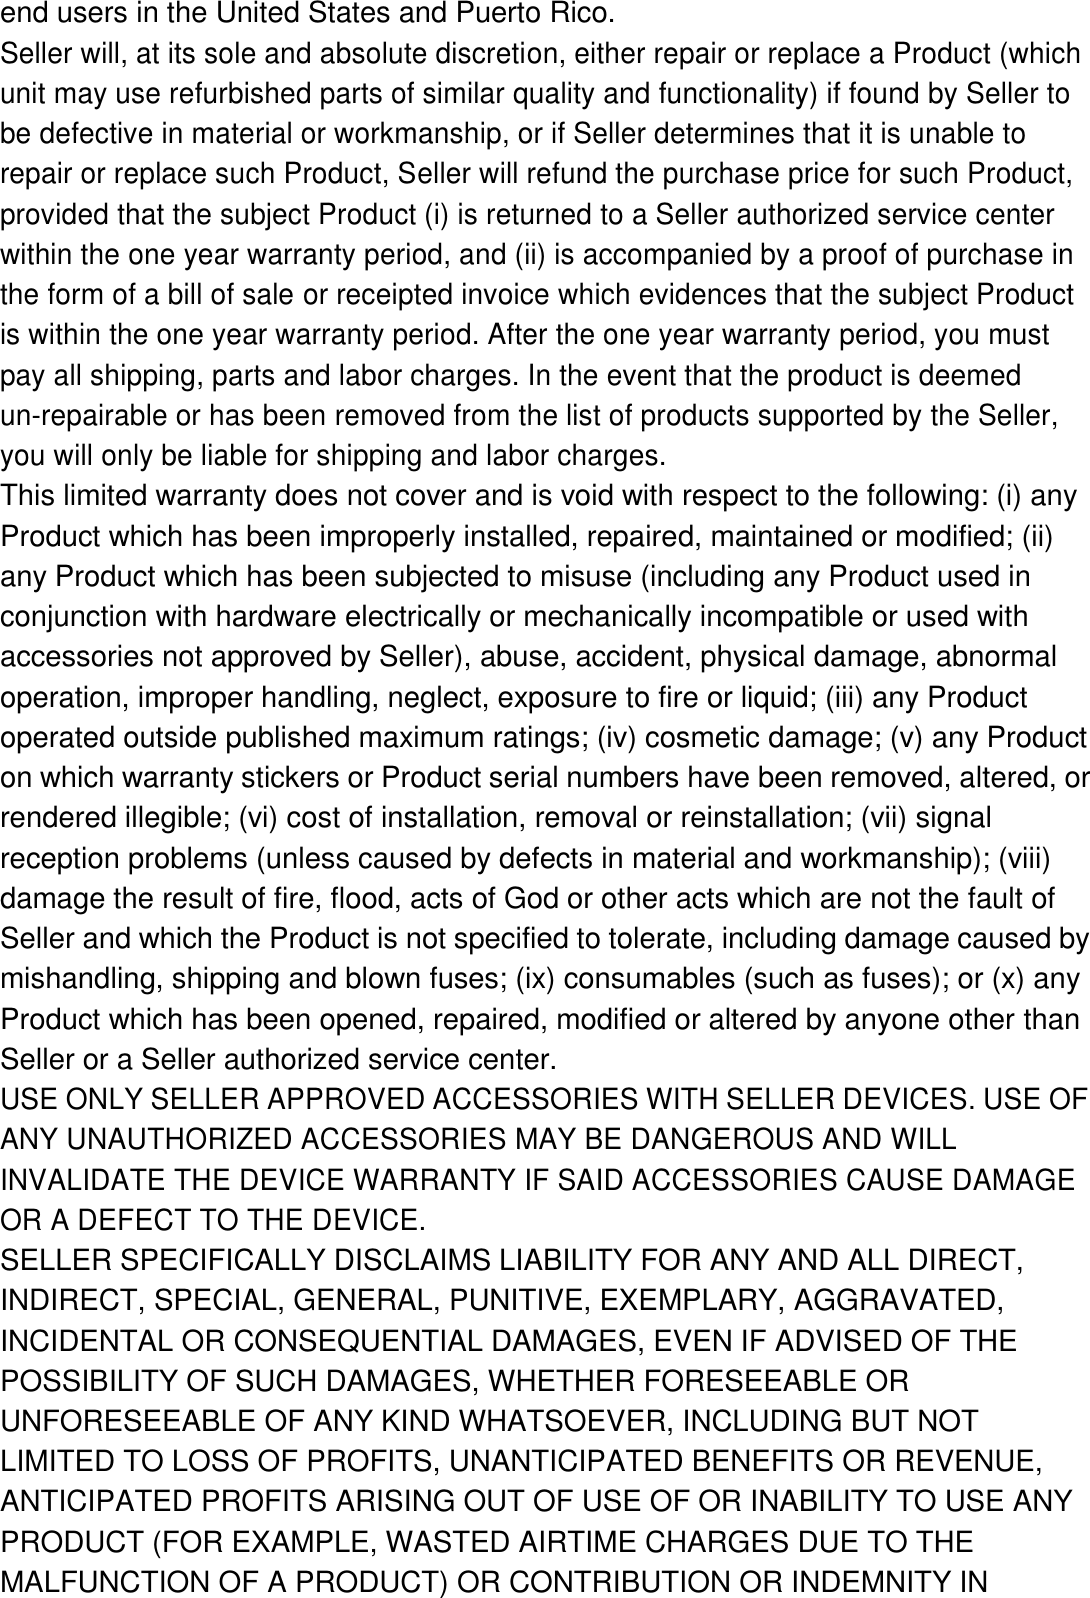 end users in the United States and Puerto Rico. Seller will, at its sole and absolute discretion, either repair or replace a Product (which unit may use refurbished parts of similar quality and functionality) if found by Seller to be defective in material or workmanship, or if Seller determines that it is unable to repair or replace such Product, Seller will refund the purchase price for such Product, provided that the subject Product (i) is returned to a Seller authorized service center within the one year warranty period, and (ii) is accompanied by a proof of purchase in the form of a bill of sale or receipted invoice which evidences that the subject Product is within the one year warranty period. After the one year warranty period, you must pay all shipping, parts and labor charges. In the event that the product is deemed un-repairable or has been removed from the list of products supported by the Seller, you will only be liable for shipping and labor charges. This limited warranty does not cover and is void with respect to the following: (i) any Product which has been improperly installed, repaired, maintained or modified; (ii) any Product which has been subjected to misuse (including any Product used in conjunction with hardware electrically or mechanically incompatible or used with accessories not approved by Seller), abuse, accident, physical damage, abnormal operation, improper handling, neglect, exposure to fire or liquid; (iii) any Product operated outside published maximum ratings; (iv) cosmetic damage; (v) any Product on which warranty stickers or Product serial numbers have been removed, altered, or rendered illegible; (vi) cost of installation, removal or reinstallation; (vii) signal reception problems (unless caused by defects in material and workmanship); (viii) damage the result of fire, flood, acts of God or other acts which are not the fault of Seller and which the Product is not specified to tolerate, including damage caused by mishandling, shipping and blown fuses; (ix) consumables (such as fuses); or (x) any Product which has been opened, repaired, modified or altered by anyone other than Seller or a Seller authorized service center. USE ONLY SELLER APPROVED ACCESSORIES WITH SELLER DEVICES. USE OF ANY UNAUTHORIZED ACCESSORIES MAY BE DANGEROUS AND WILL INVALIDATE THE DEVICE WARRANTY IF SAID ACCESSORIES CAUSE DAMAGE OR A DEFECT TO THE DEVICE. SELLER SPECIFICALLY DISCLAIMS LIABILITY FOR ANY AND ALL DIRECT, INDIRECT, SPECIAL, GENERAL, PUNITIVE, EXEMPLARY, AGGRAVATED, INCIDENTAL OR CONSEQUENTIAL DAMAGES, EVEN IF ADVISED OF THE POSSIBILITY OF SUCH DAMAGES, WHETHER FORESEEABLE OR UNFORESEEABLE OF ANY KIND WHATSOEVER, INCLUDING BUT NOT LIMITED TO LOSS OF PROFITS, UNANTICIPATED BENEFITS OR REVENUE, ANTICIPATED PROFITS ARISING OUT OF USE OF OR INABILITY TO USE ANY PRODUCT (FOR EXAMPLE, WASTED AIRTIME CHARGES DUE TO THE MALFUNCTION OF A PRODUCT) OR CONTRIBUTION OR INDEMNITY IN 